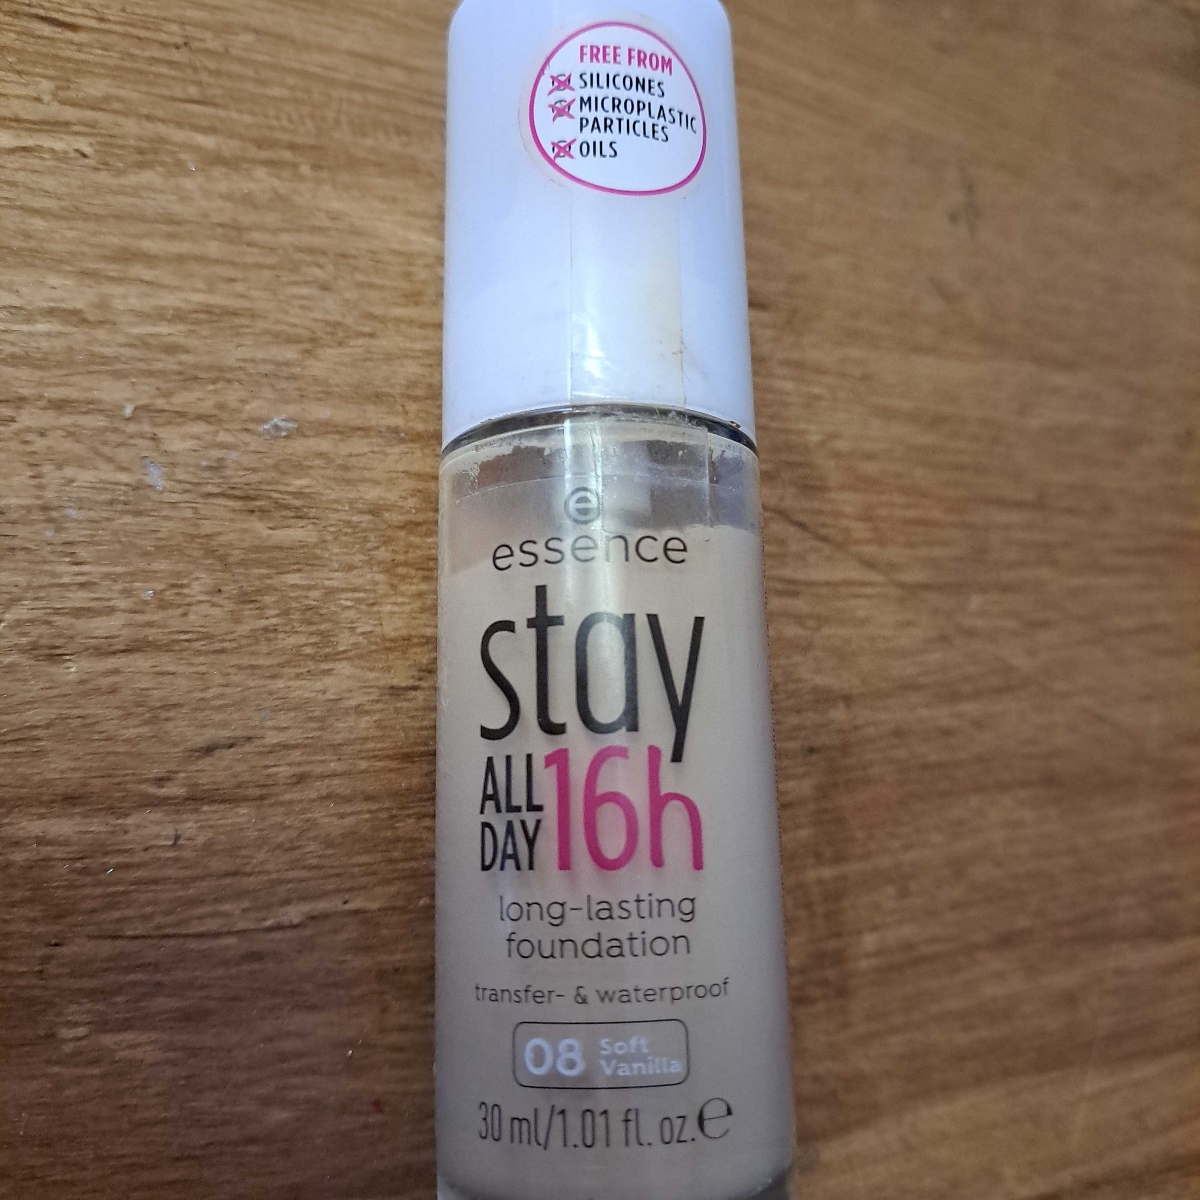 stay long-lasting 08 vanilla 16h soft | Reviews foundation all abillion day Essence